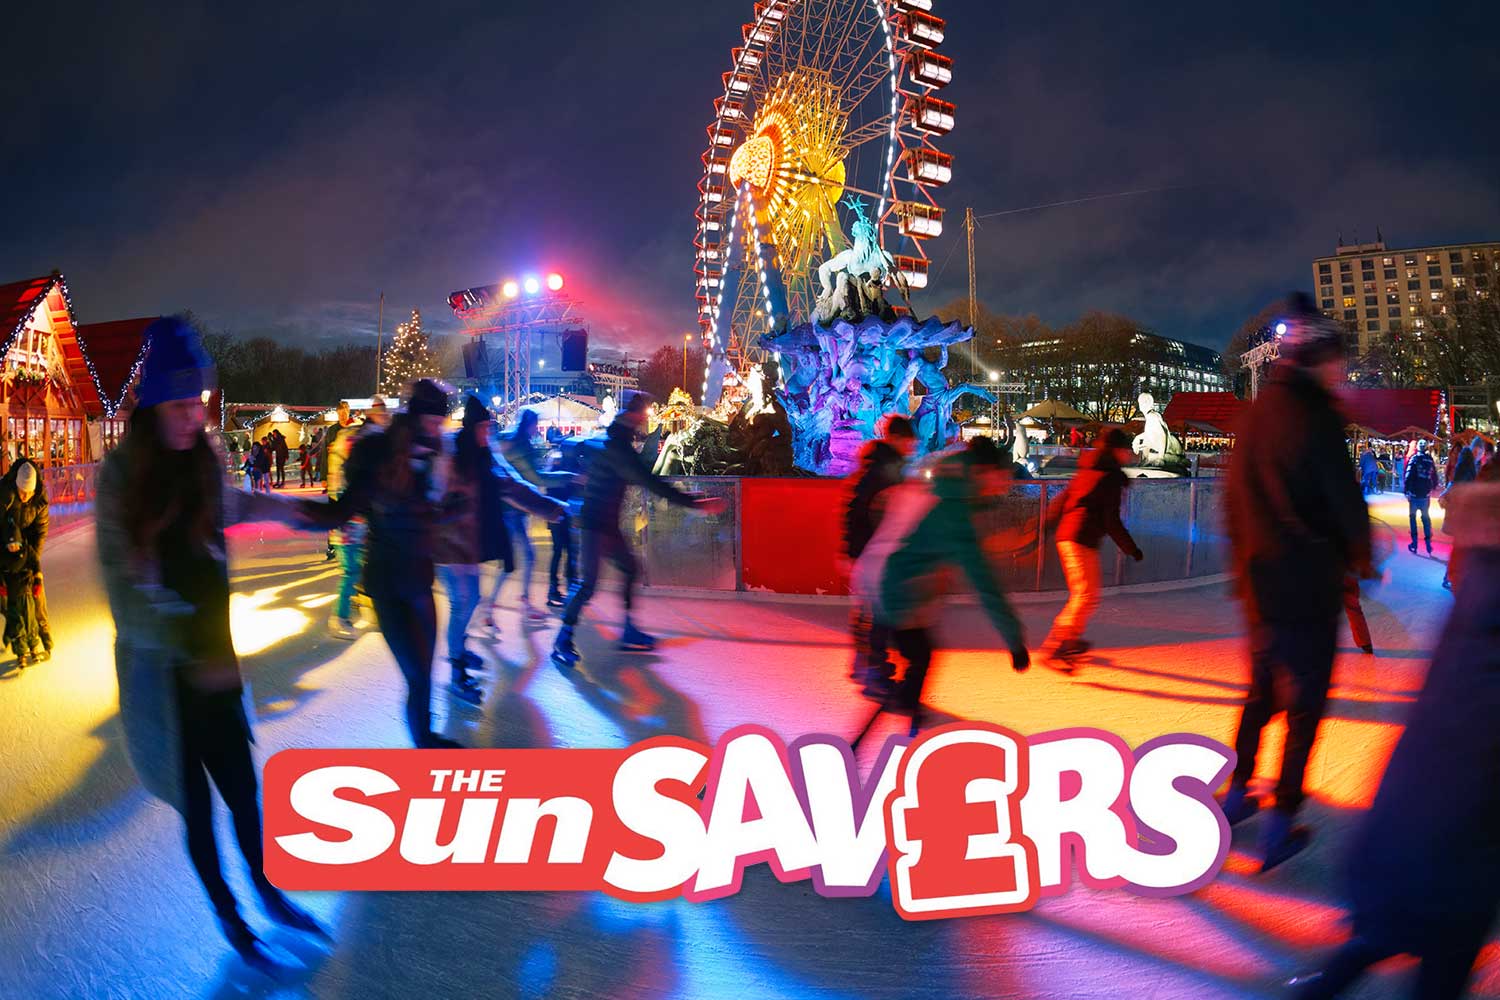 Enjoy festive days out with the family and save with these Sun Savers tips